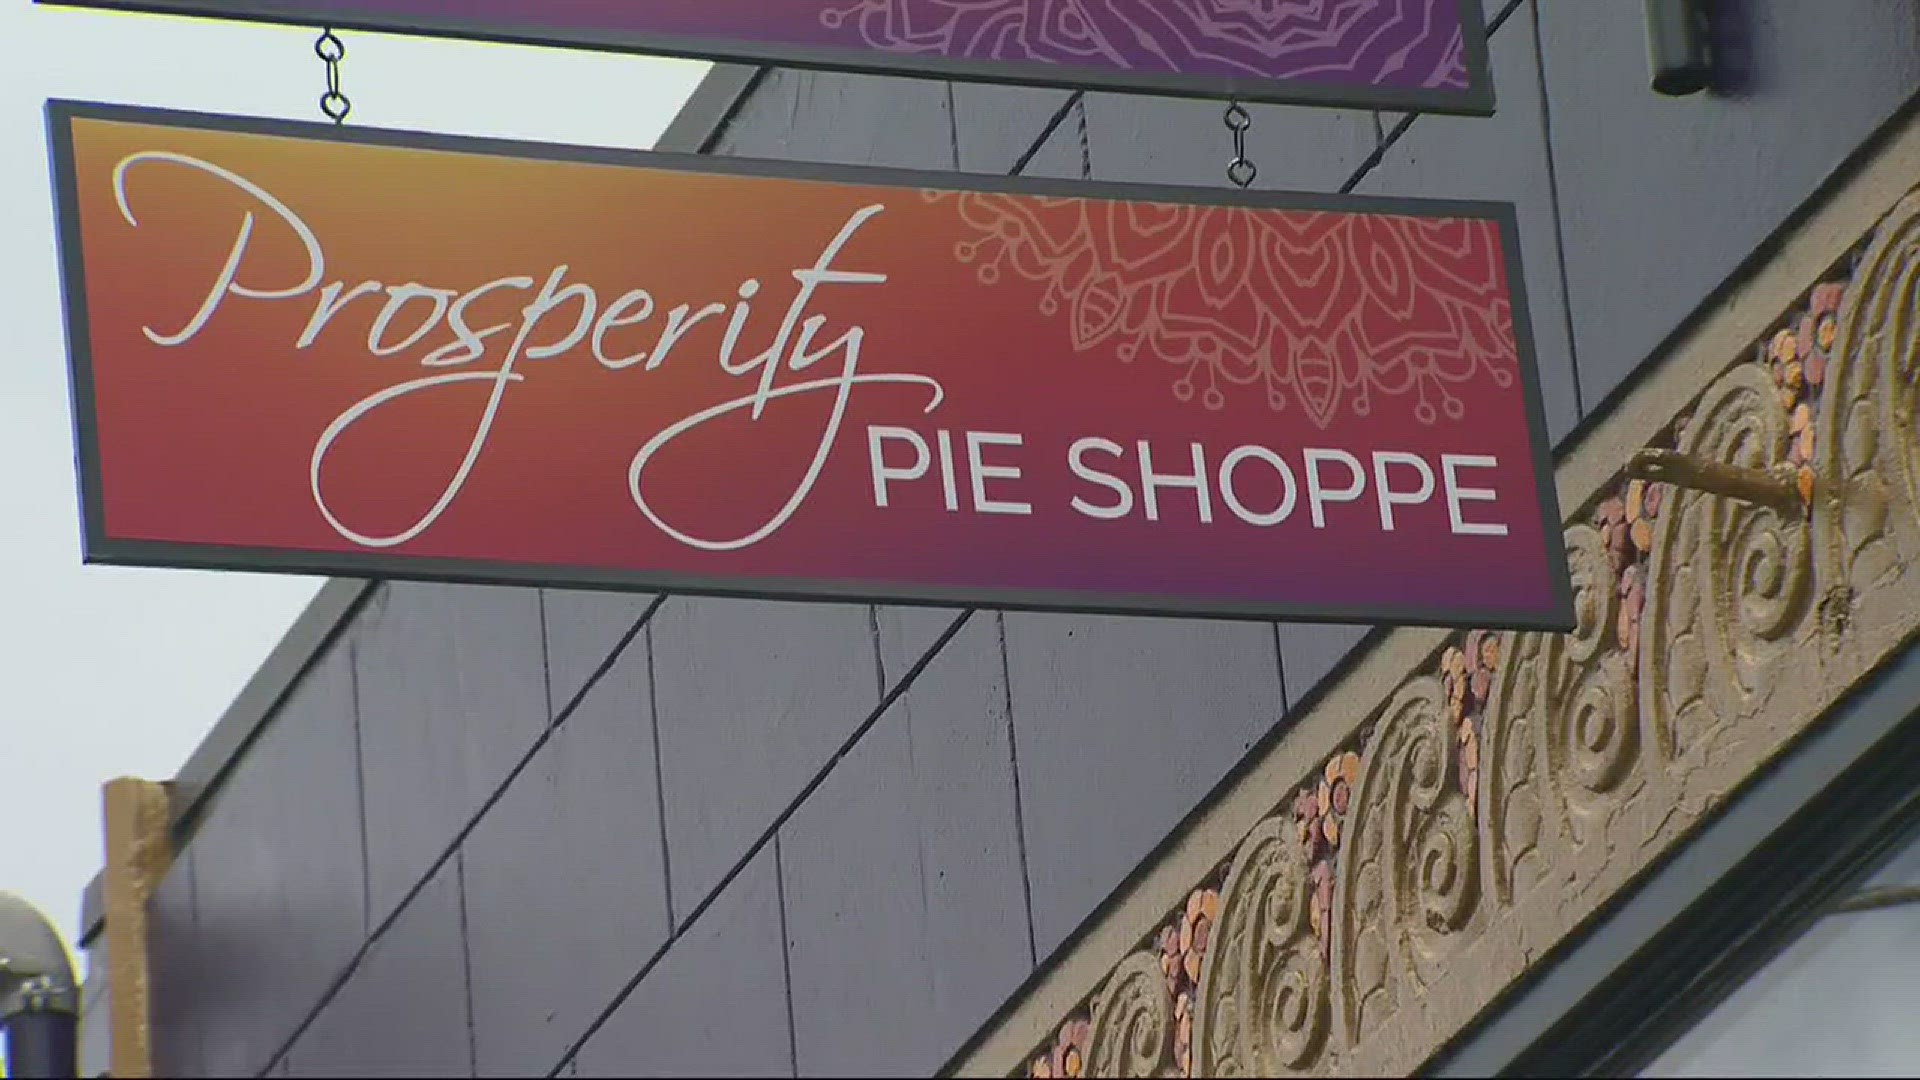 Pie shop offers slices and financial classes